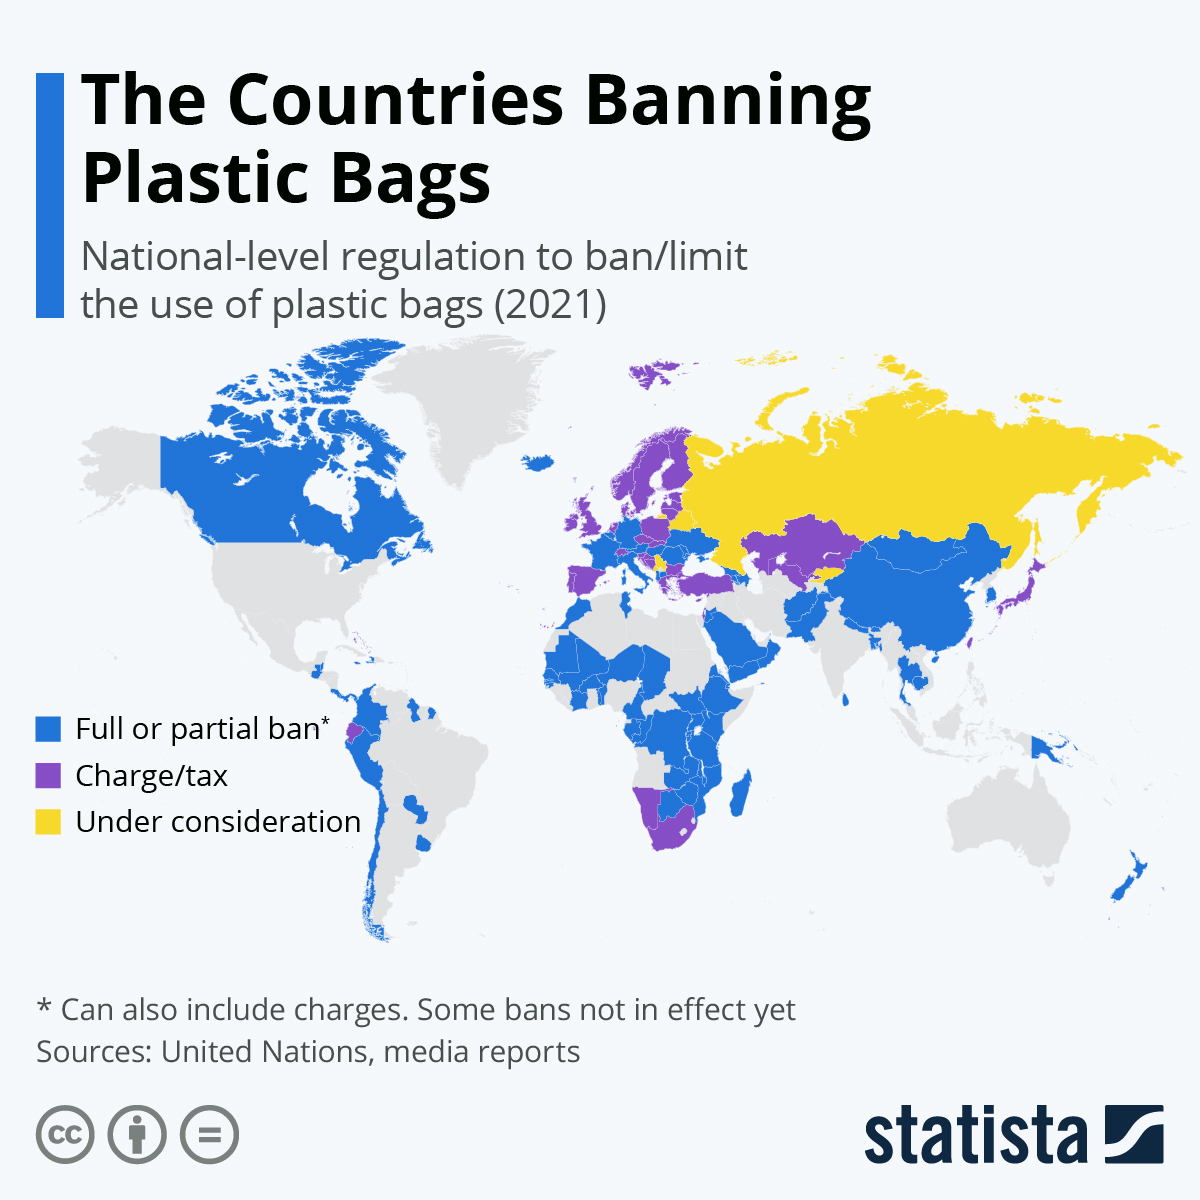 Who banned plastic bags first? updated November 2022